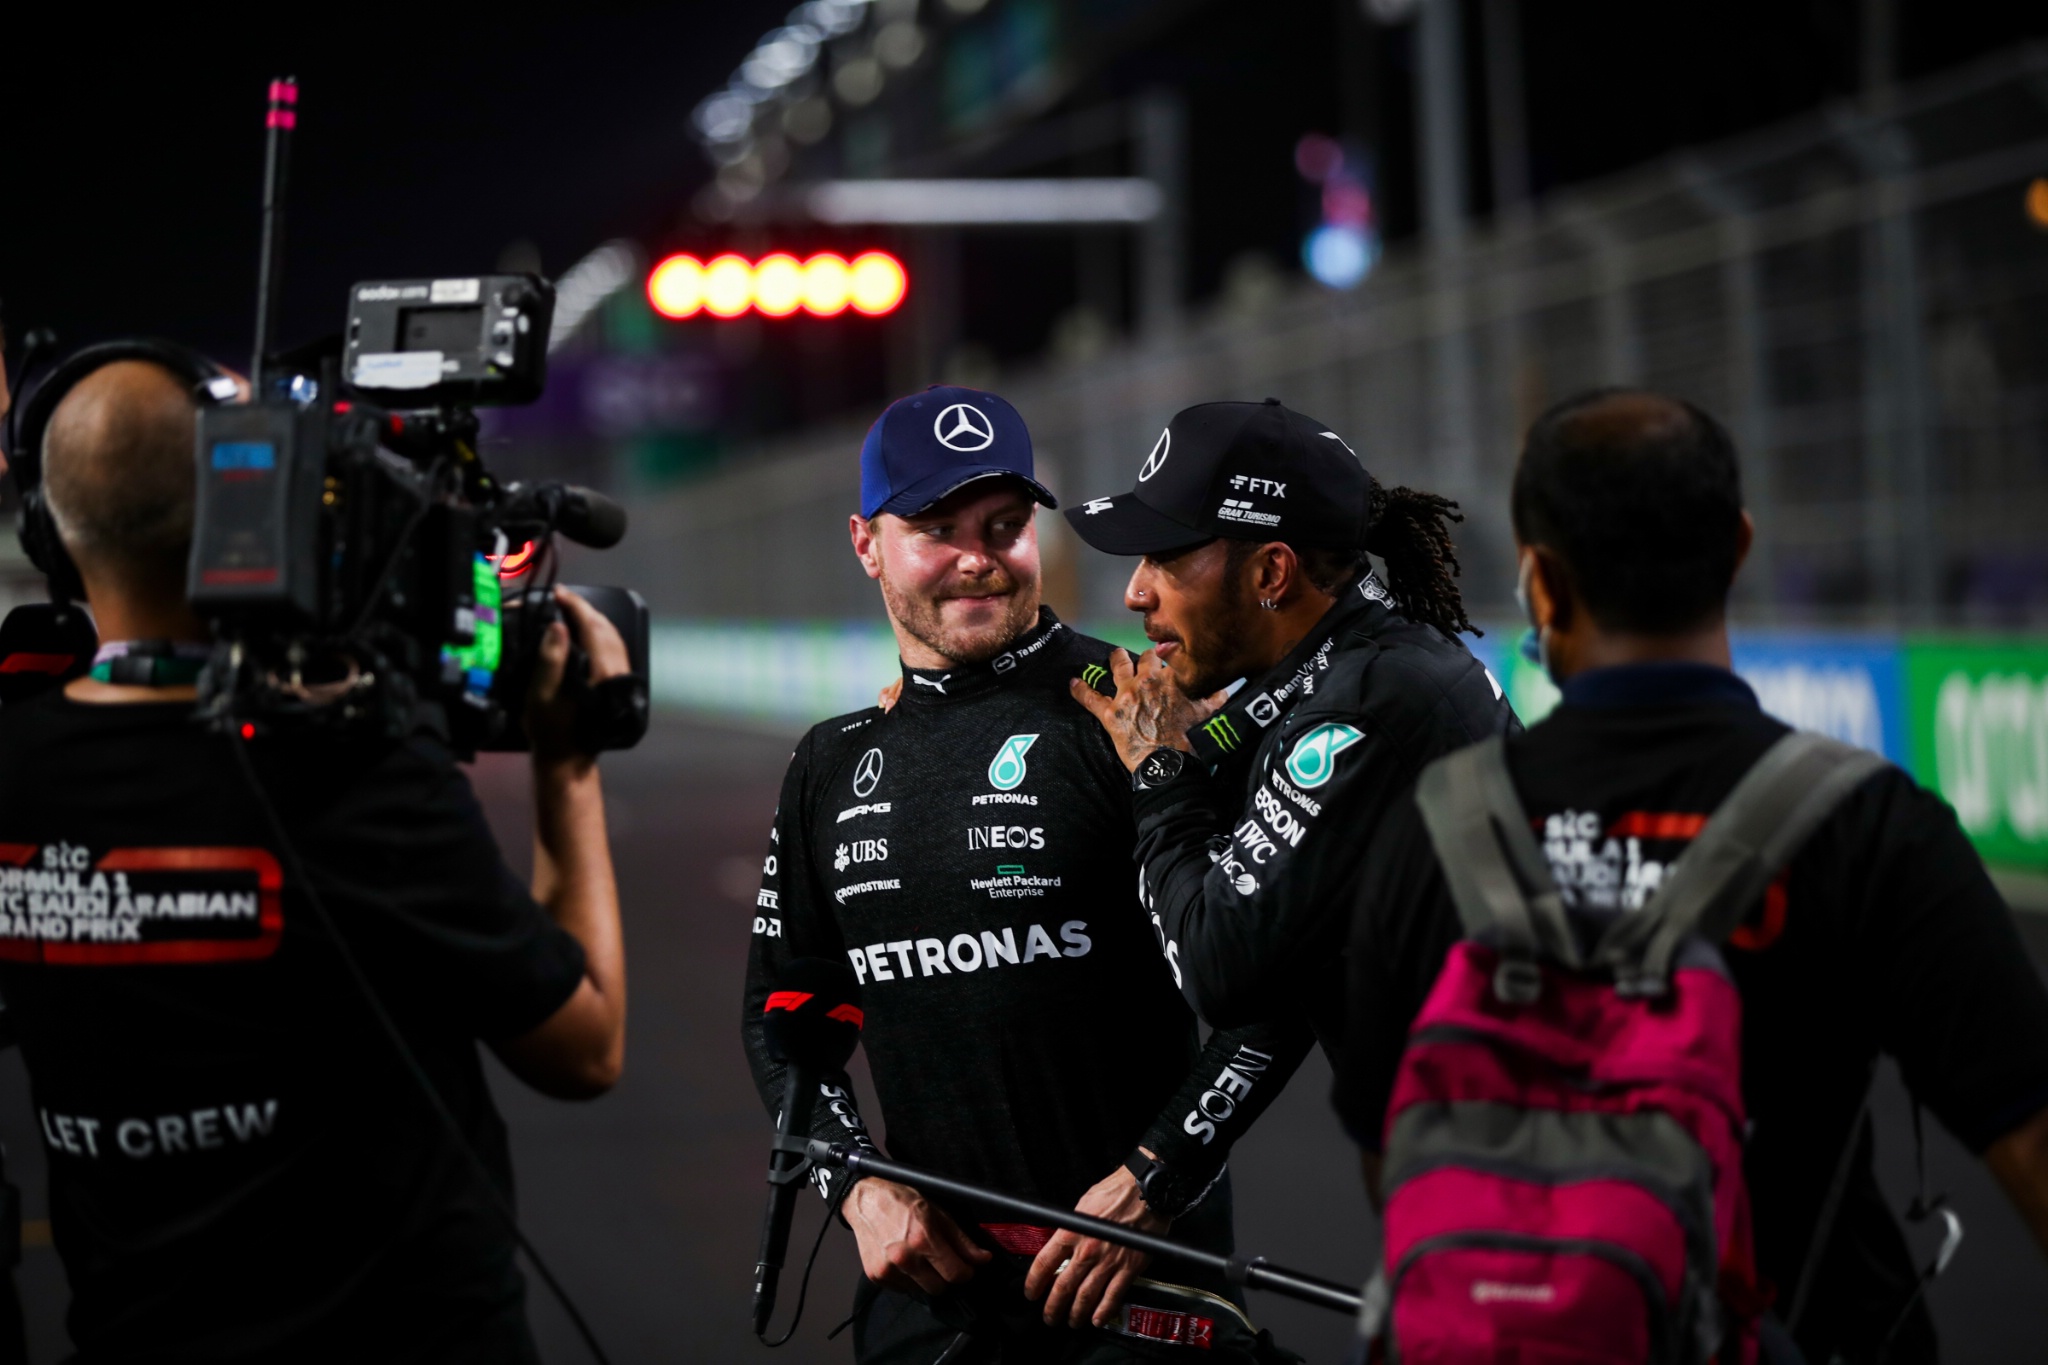 Lewis Hamilton (GBR) Mercedes AMG F1 (Right) celebrates his pole position with second placed team mate Valtteri Bottas (FIN) Mercedes AMG F1 in qualifying parc ferme.